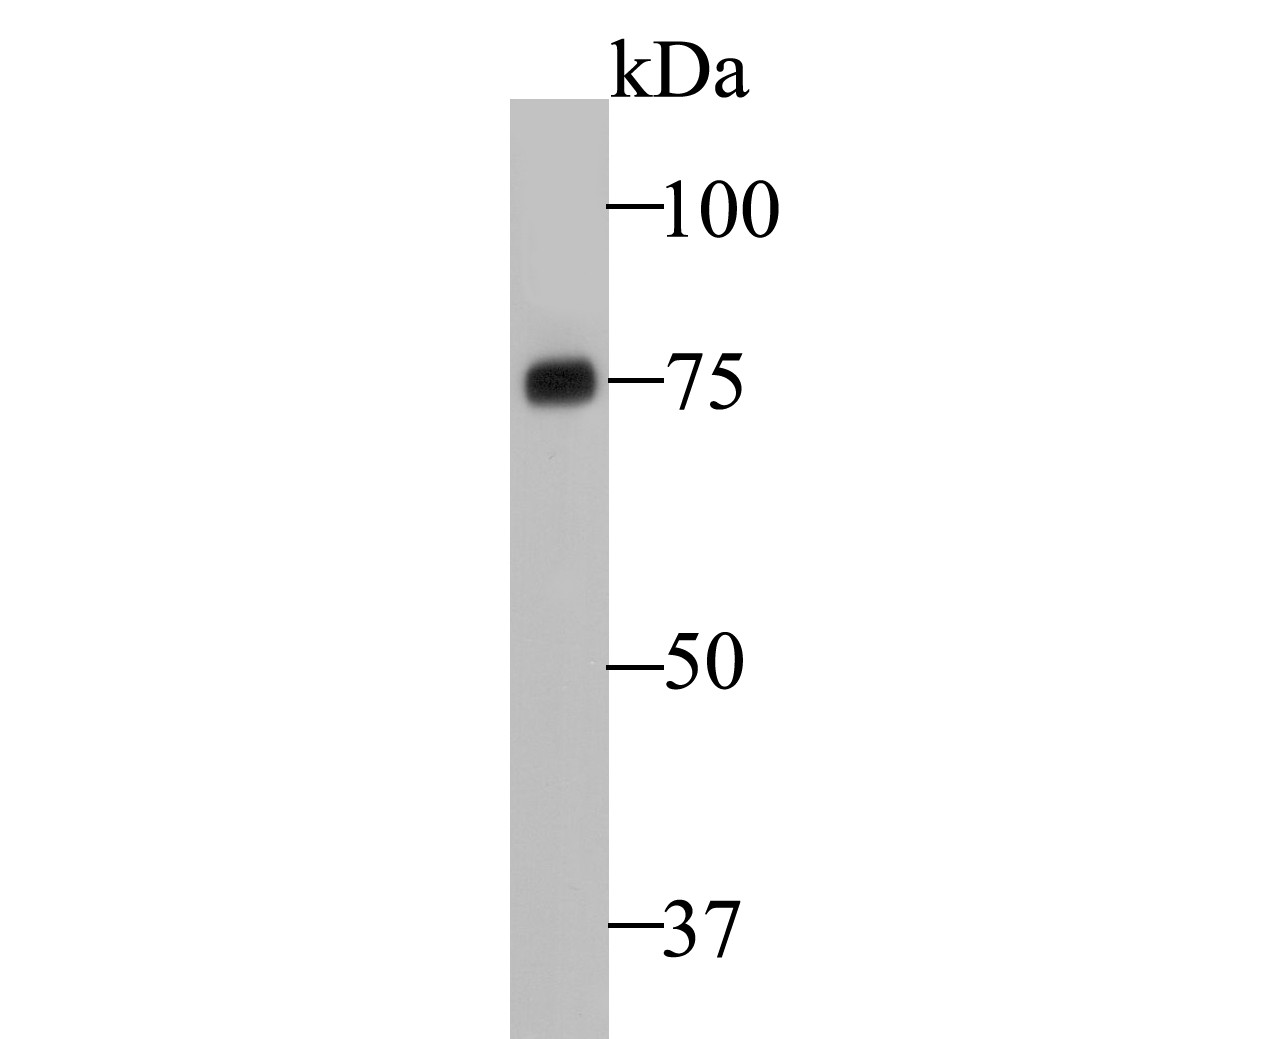 Western blot analysis of Pannexin 2 on HepG2 cell lysate. Proteins were transferred to a PVDF membrane and blocked with 5% BSA in PBS for 1 hour at room temperature. The primary antibody (ER1901-05, 1/2,000) was used in 5% BSA at room temperature for 2 hours. Goat Anti-Rabbit IgG - HRP Secondary Antibody (HA1001) at 1:5,000 dilution was used for 1 hour at room temperature.